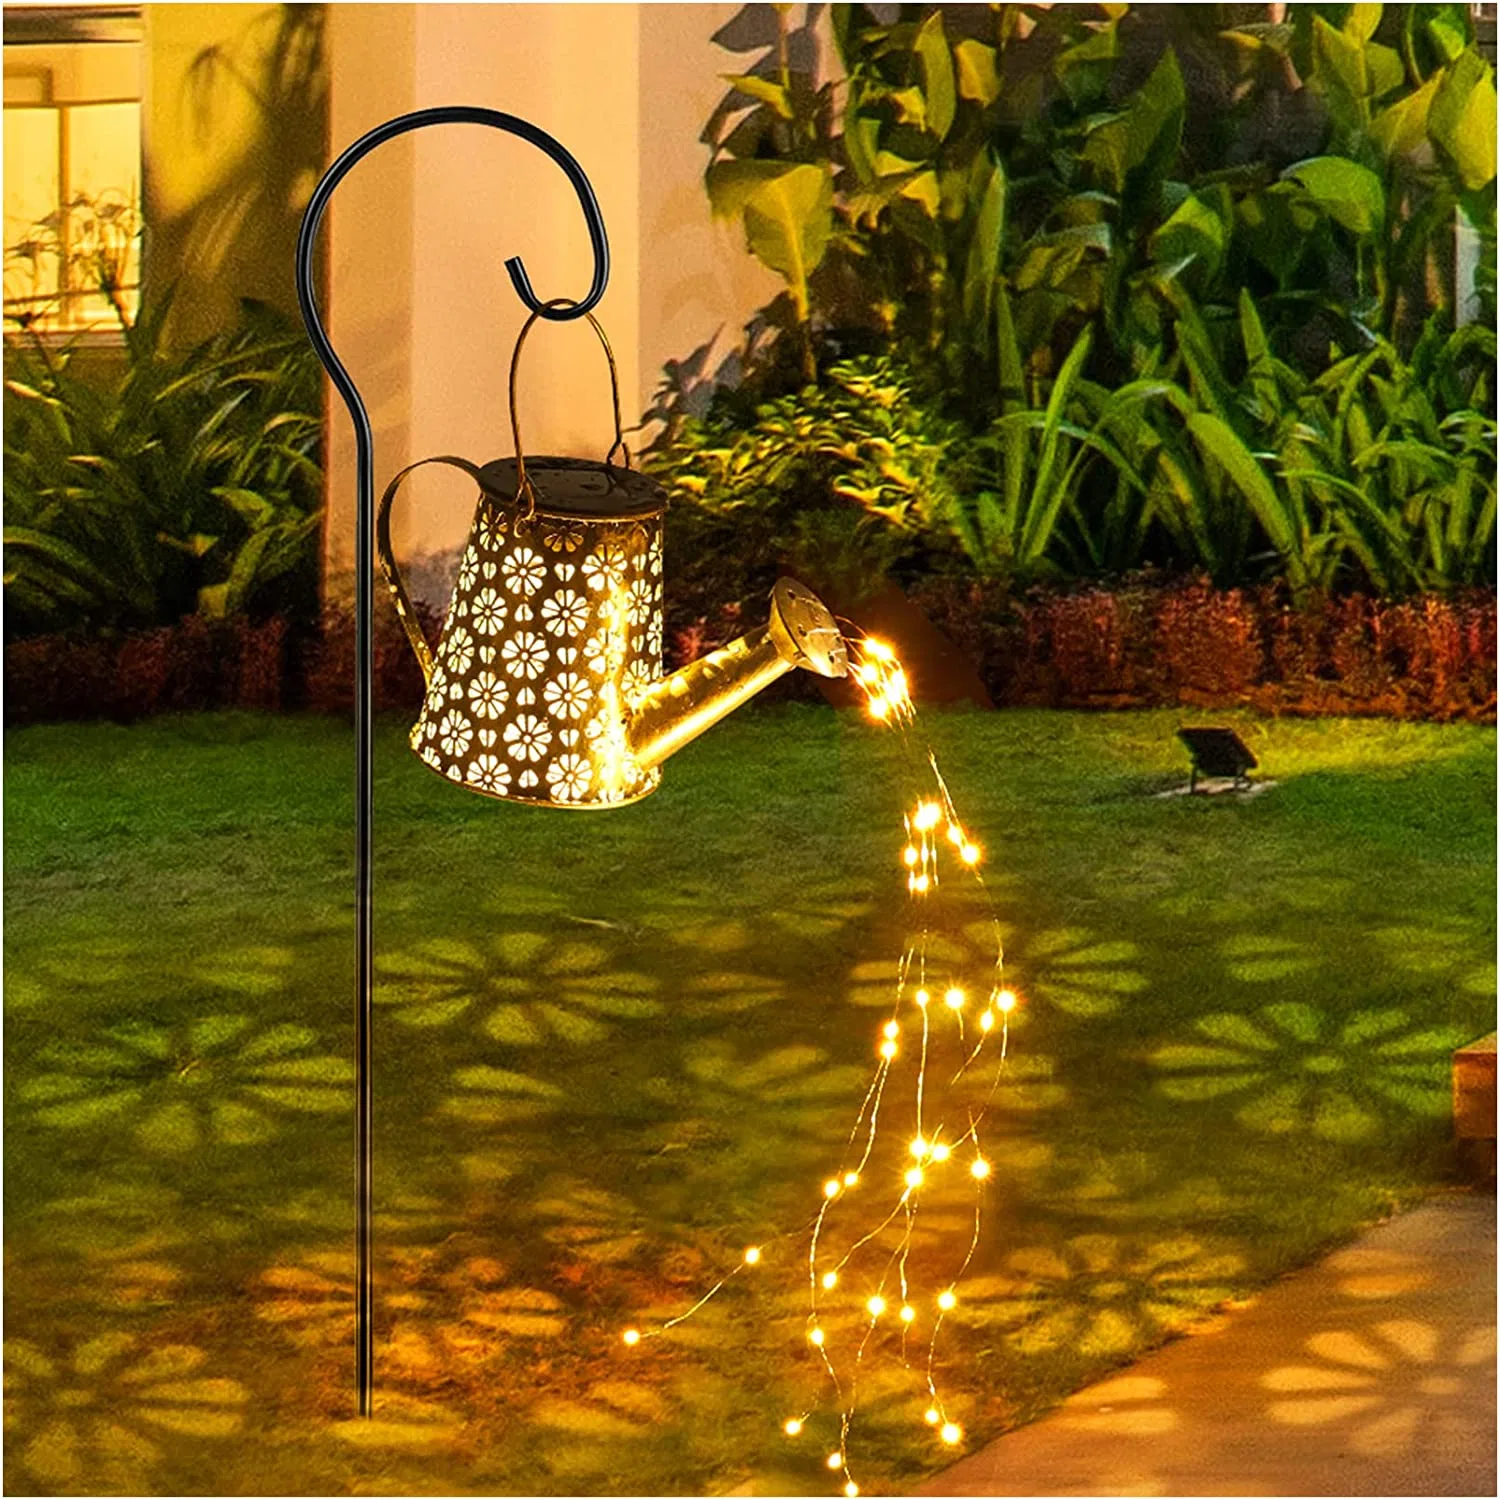 Solar Light Watering Can Outdoor Garden Stake Decoration for Yard Porch Lawn Driveway Patio Backyard Pathway